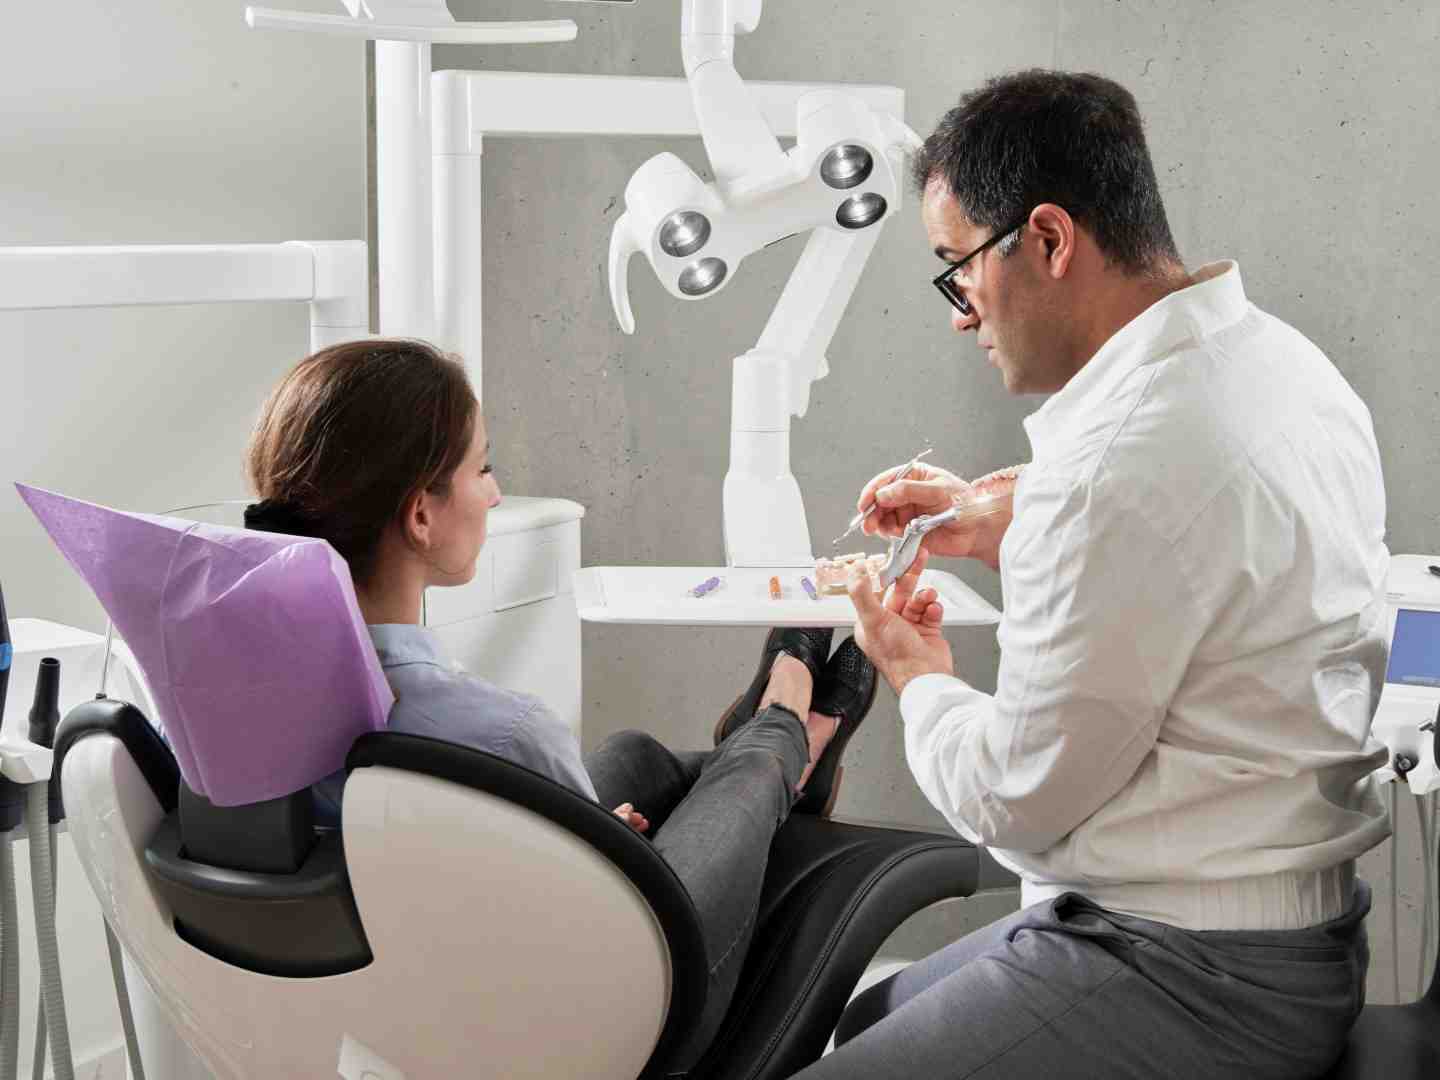 Does Medicaid cover dental cleaning?